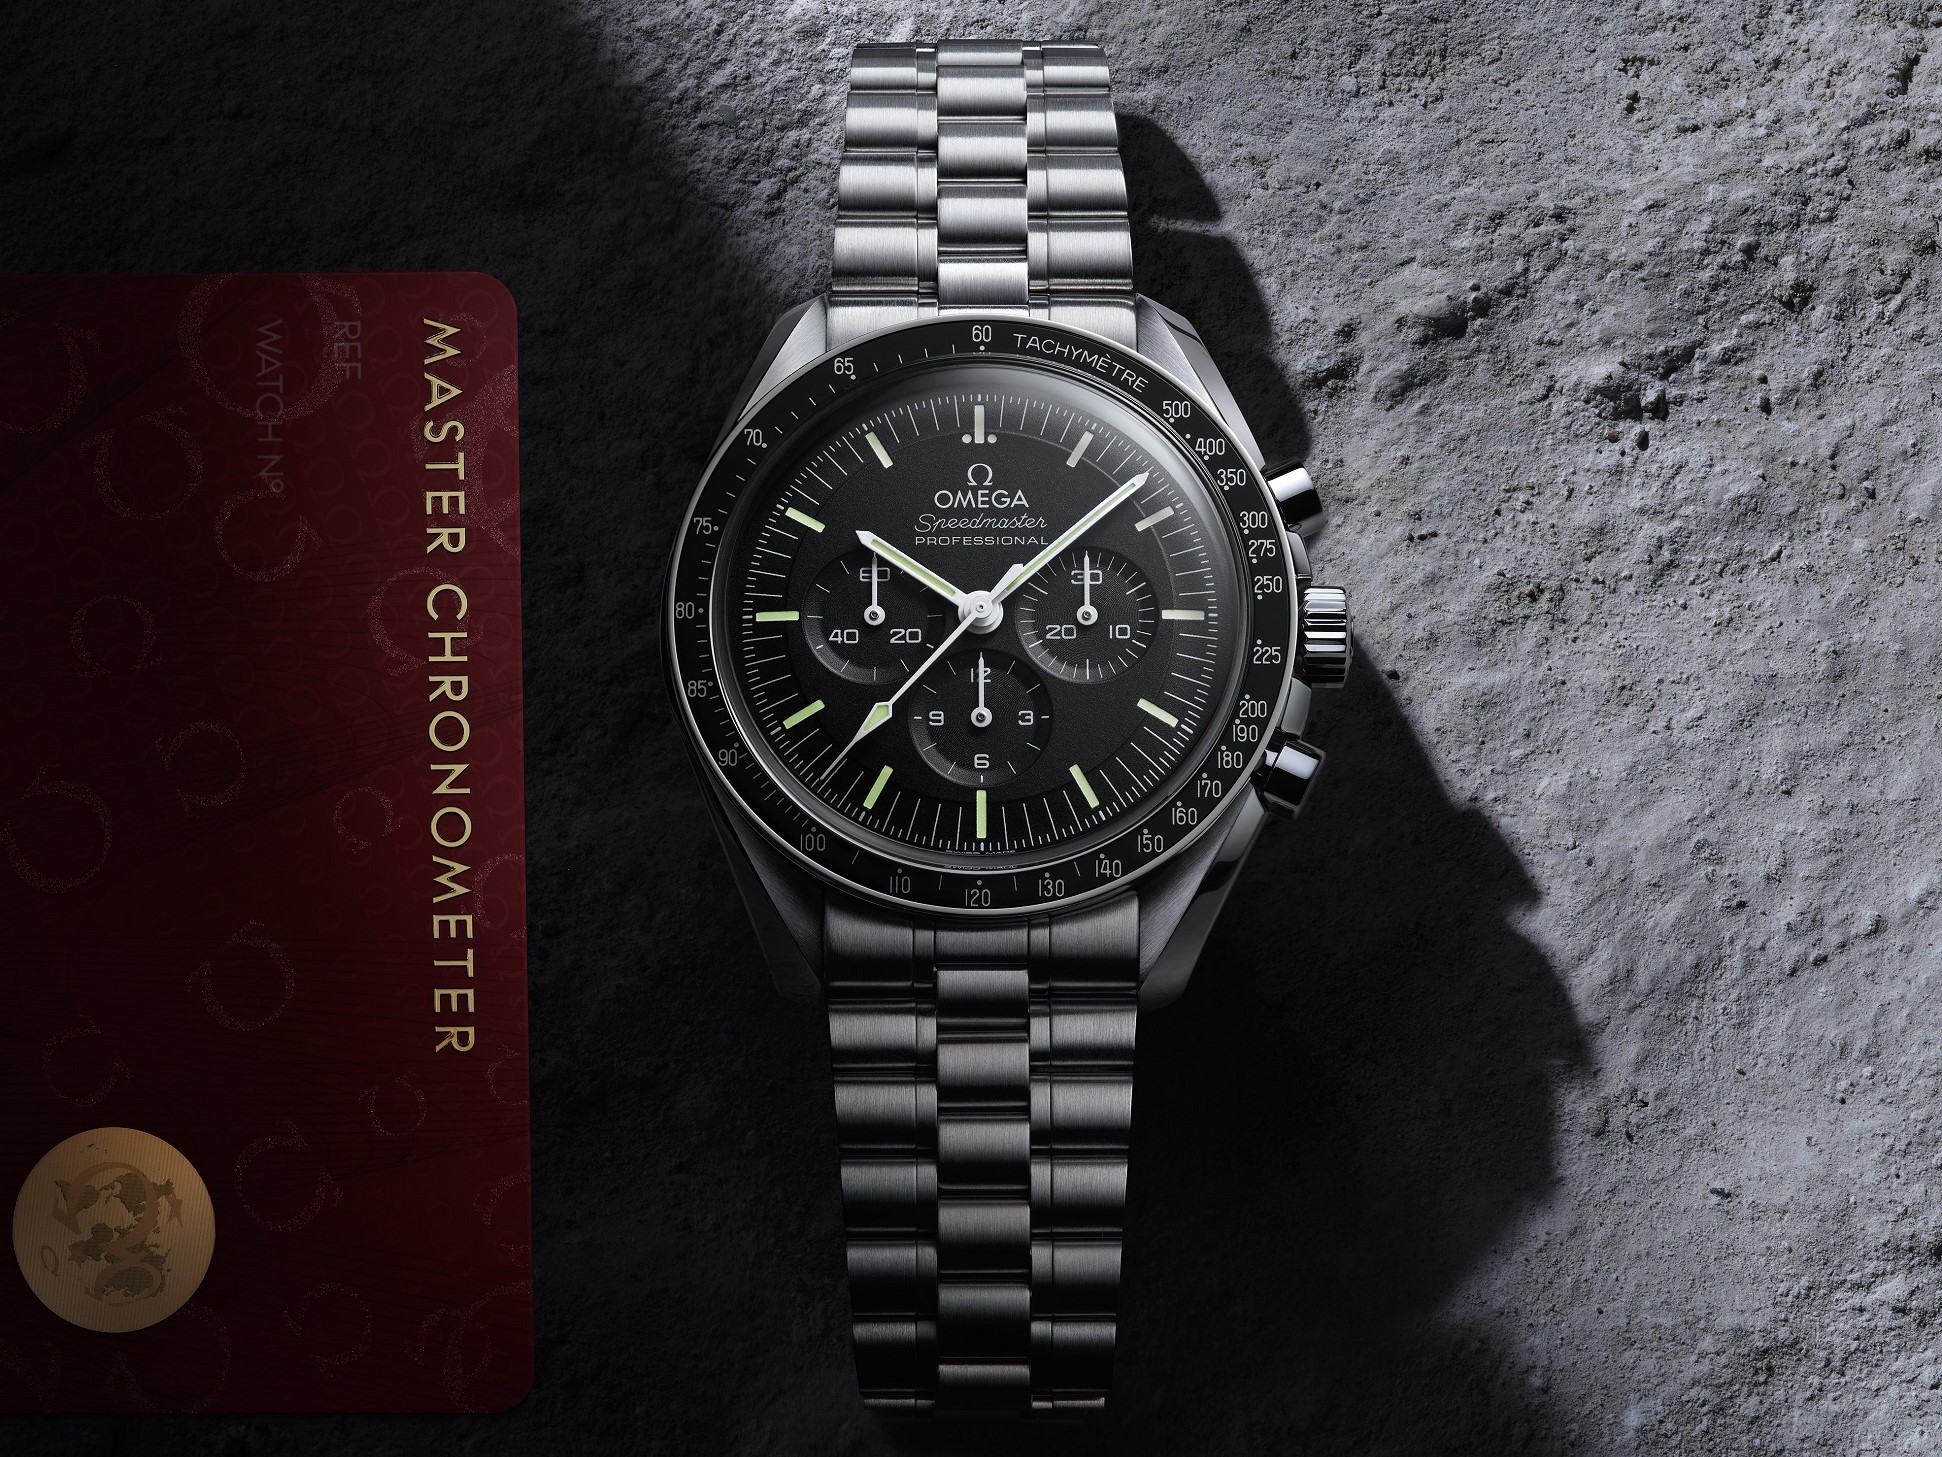 MOONWATCH NOW MASTER CHRONOMETER CERTIFIED image